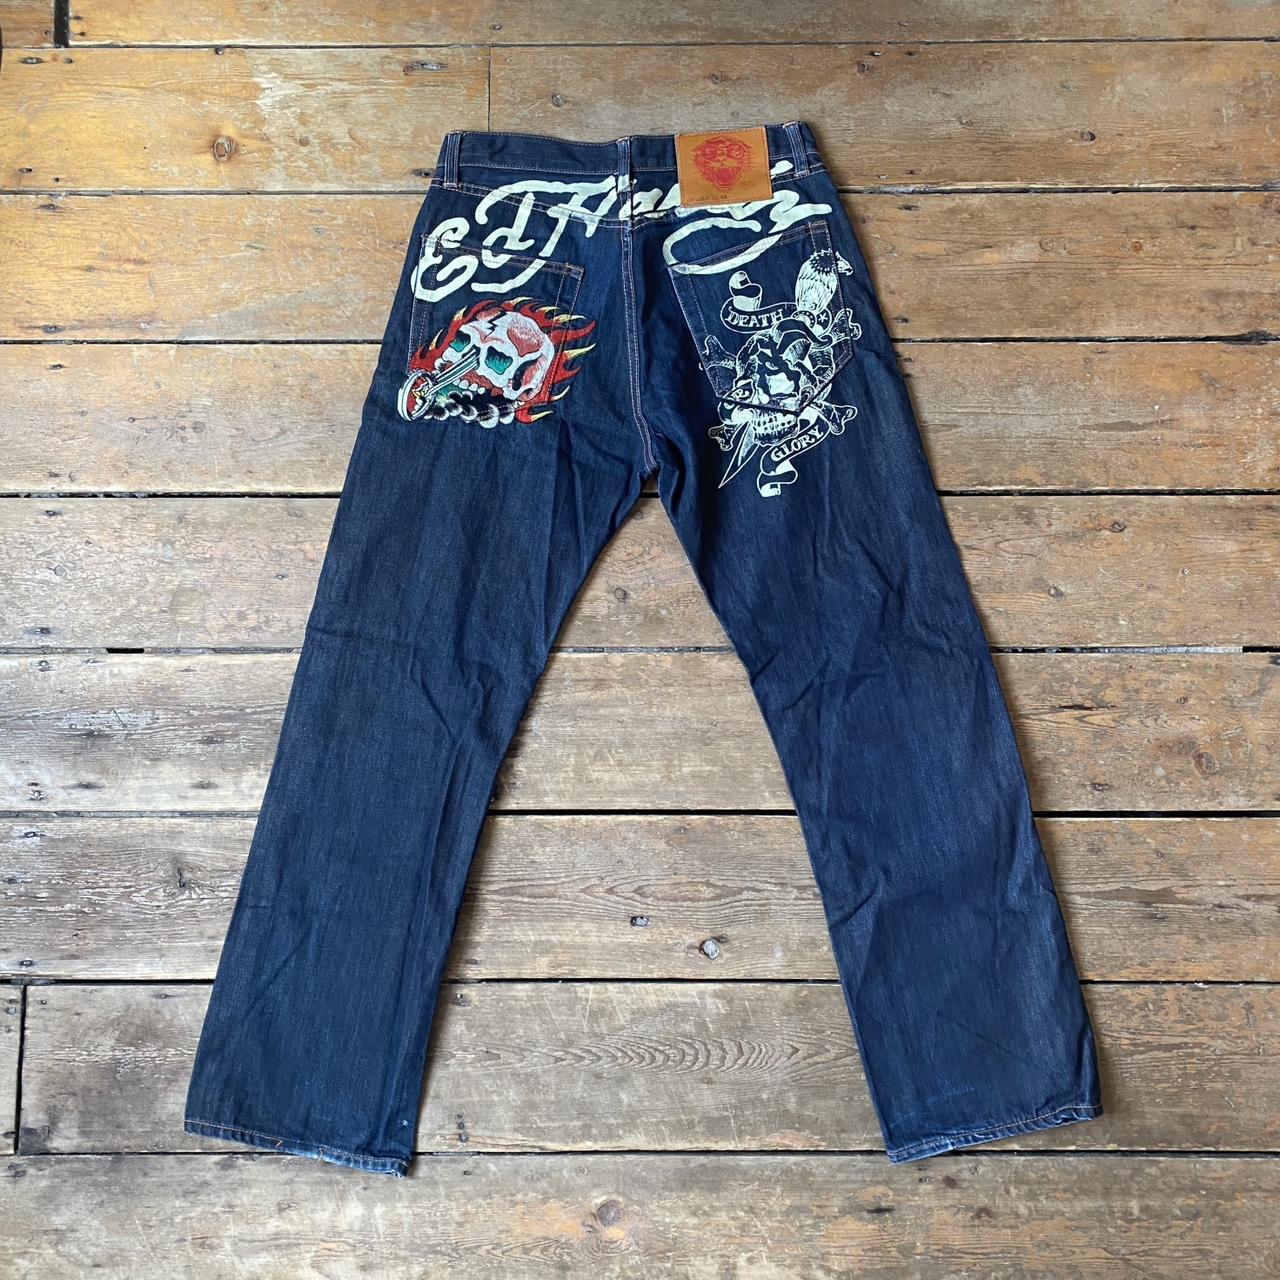 Vintage Ed hardy spell out jeans Waist 32